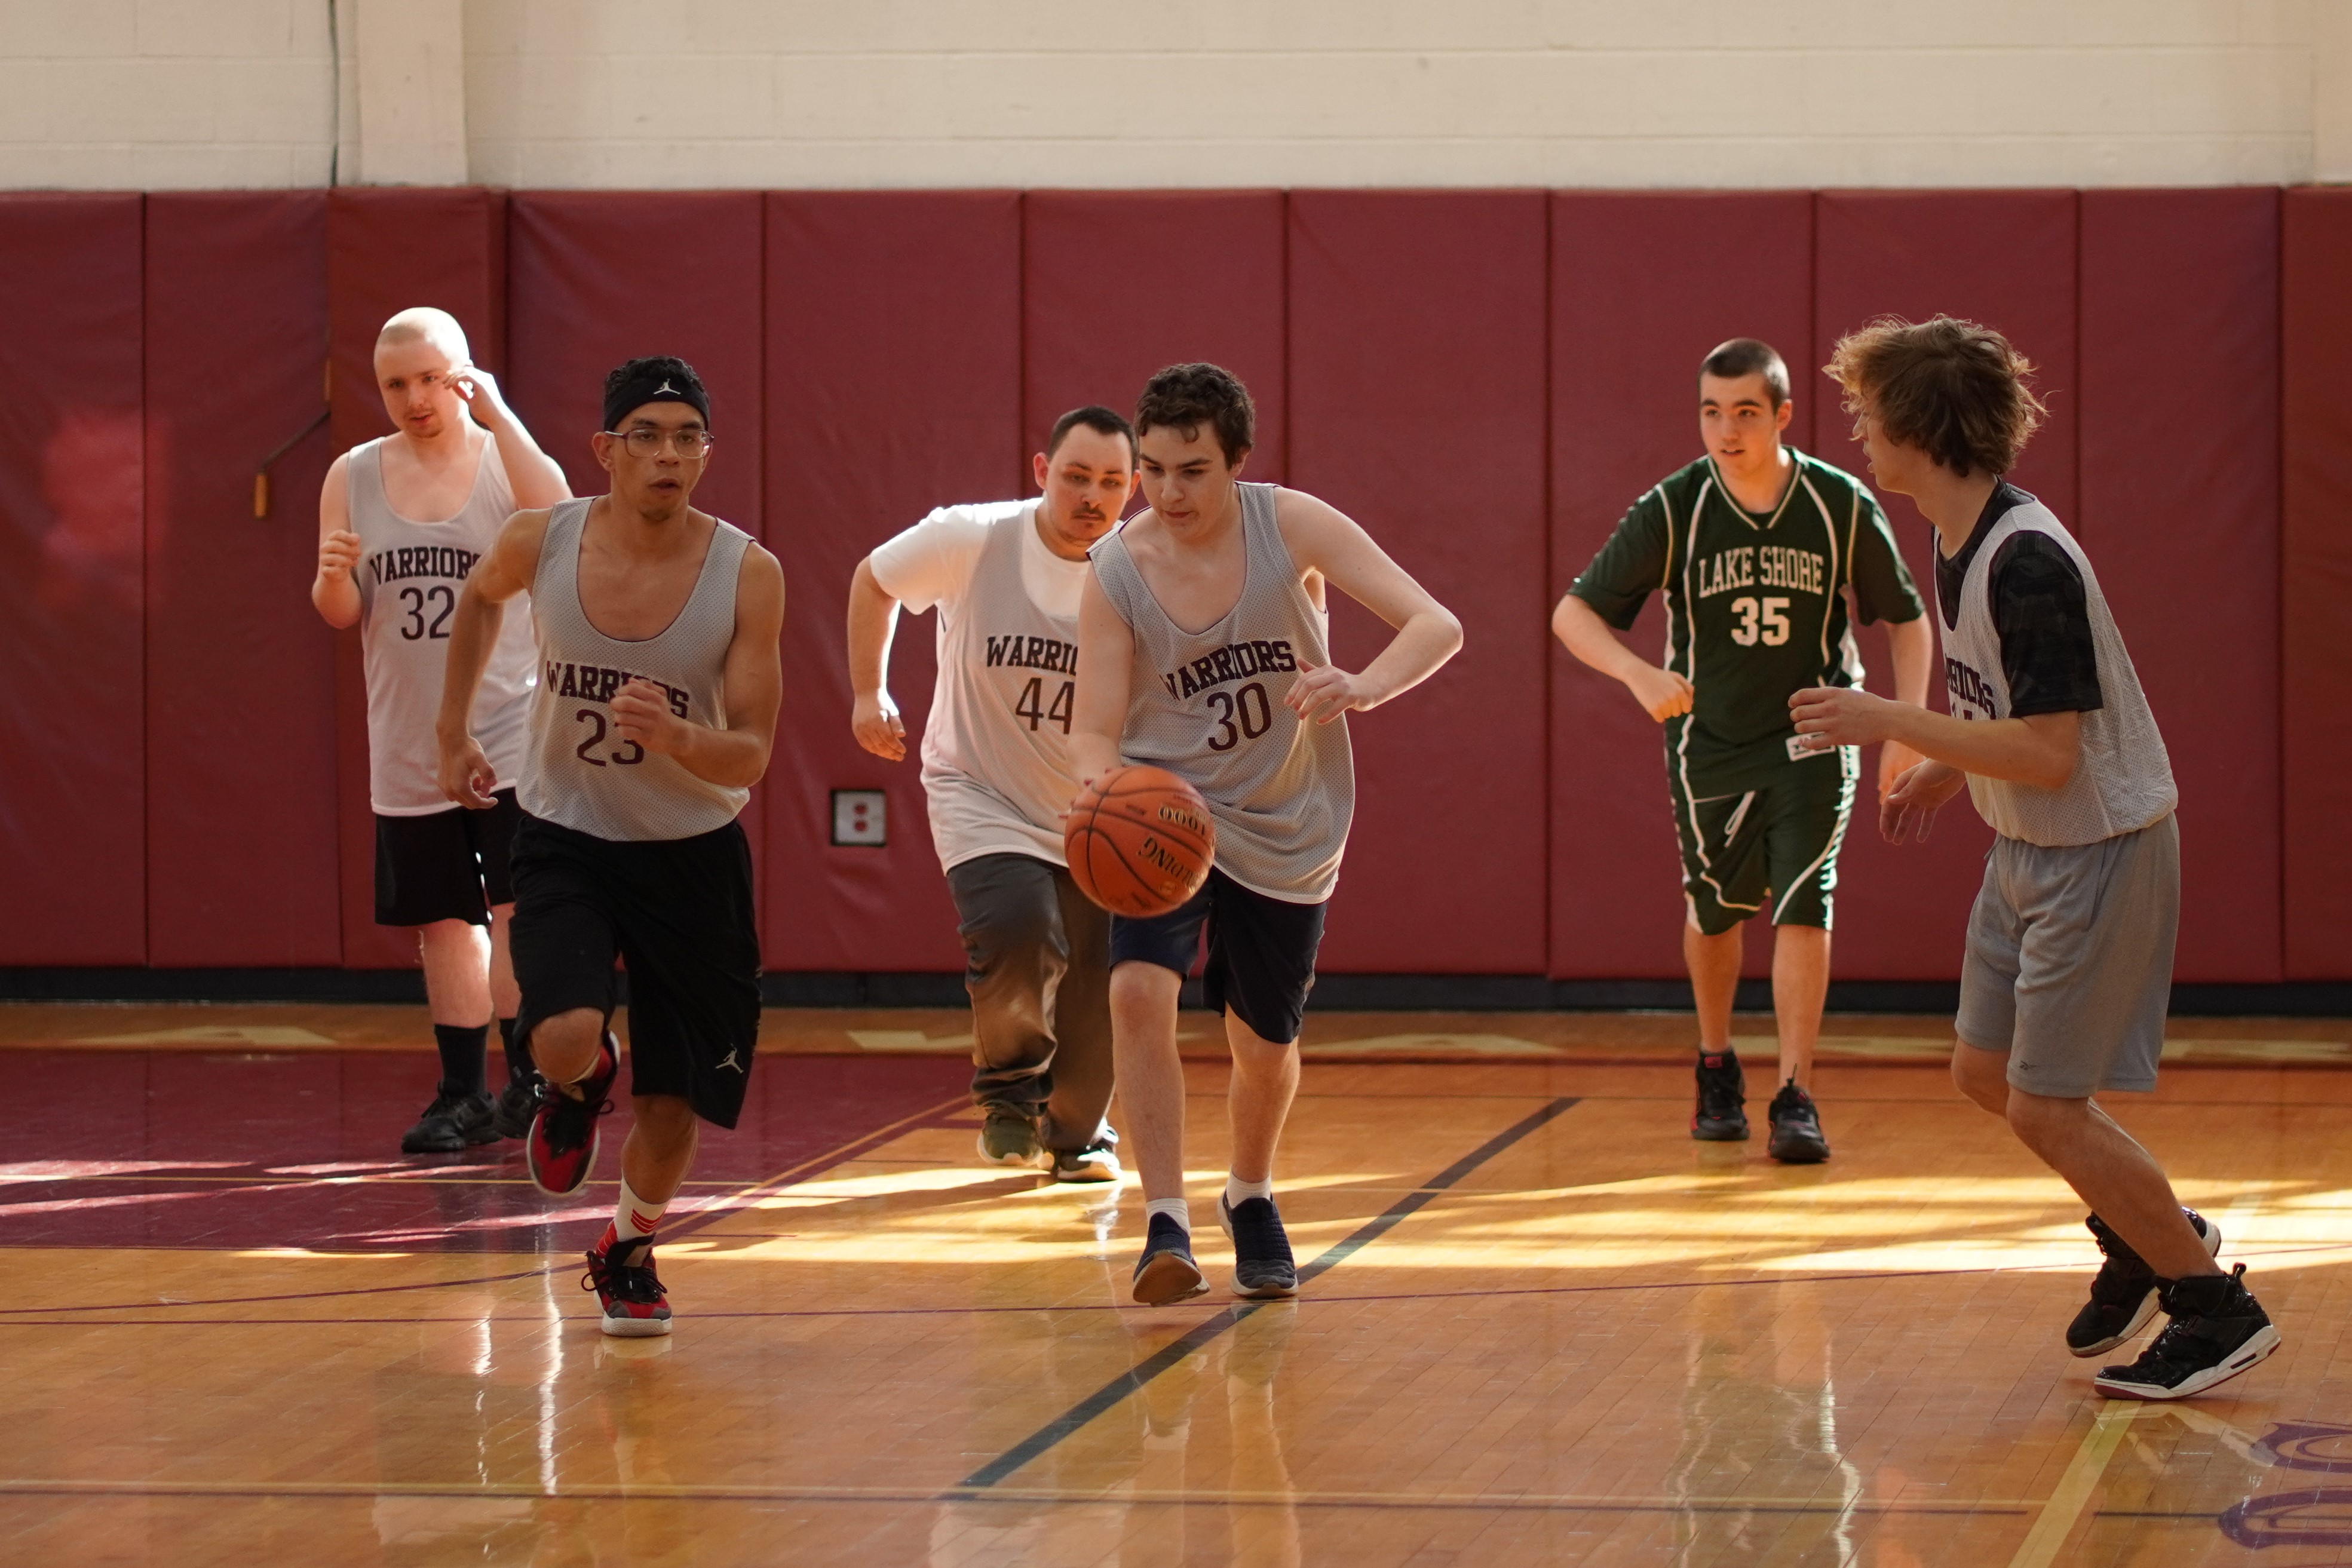 Tonawanda Unified basketball action in the first quarter